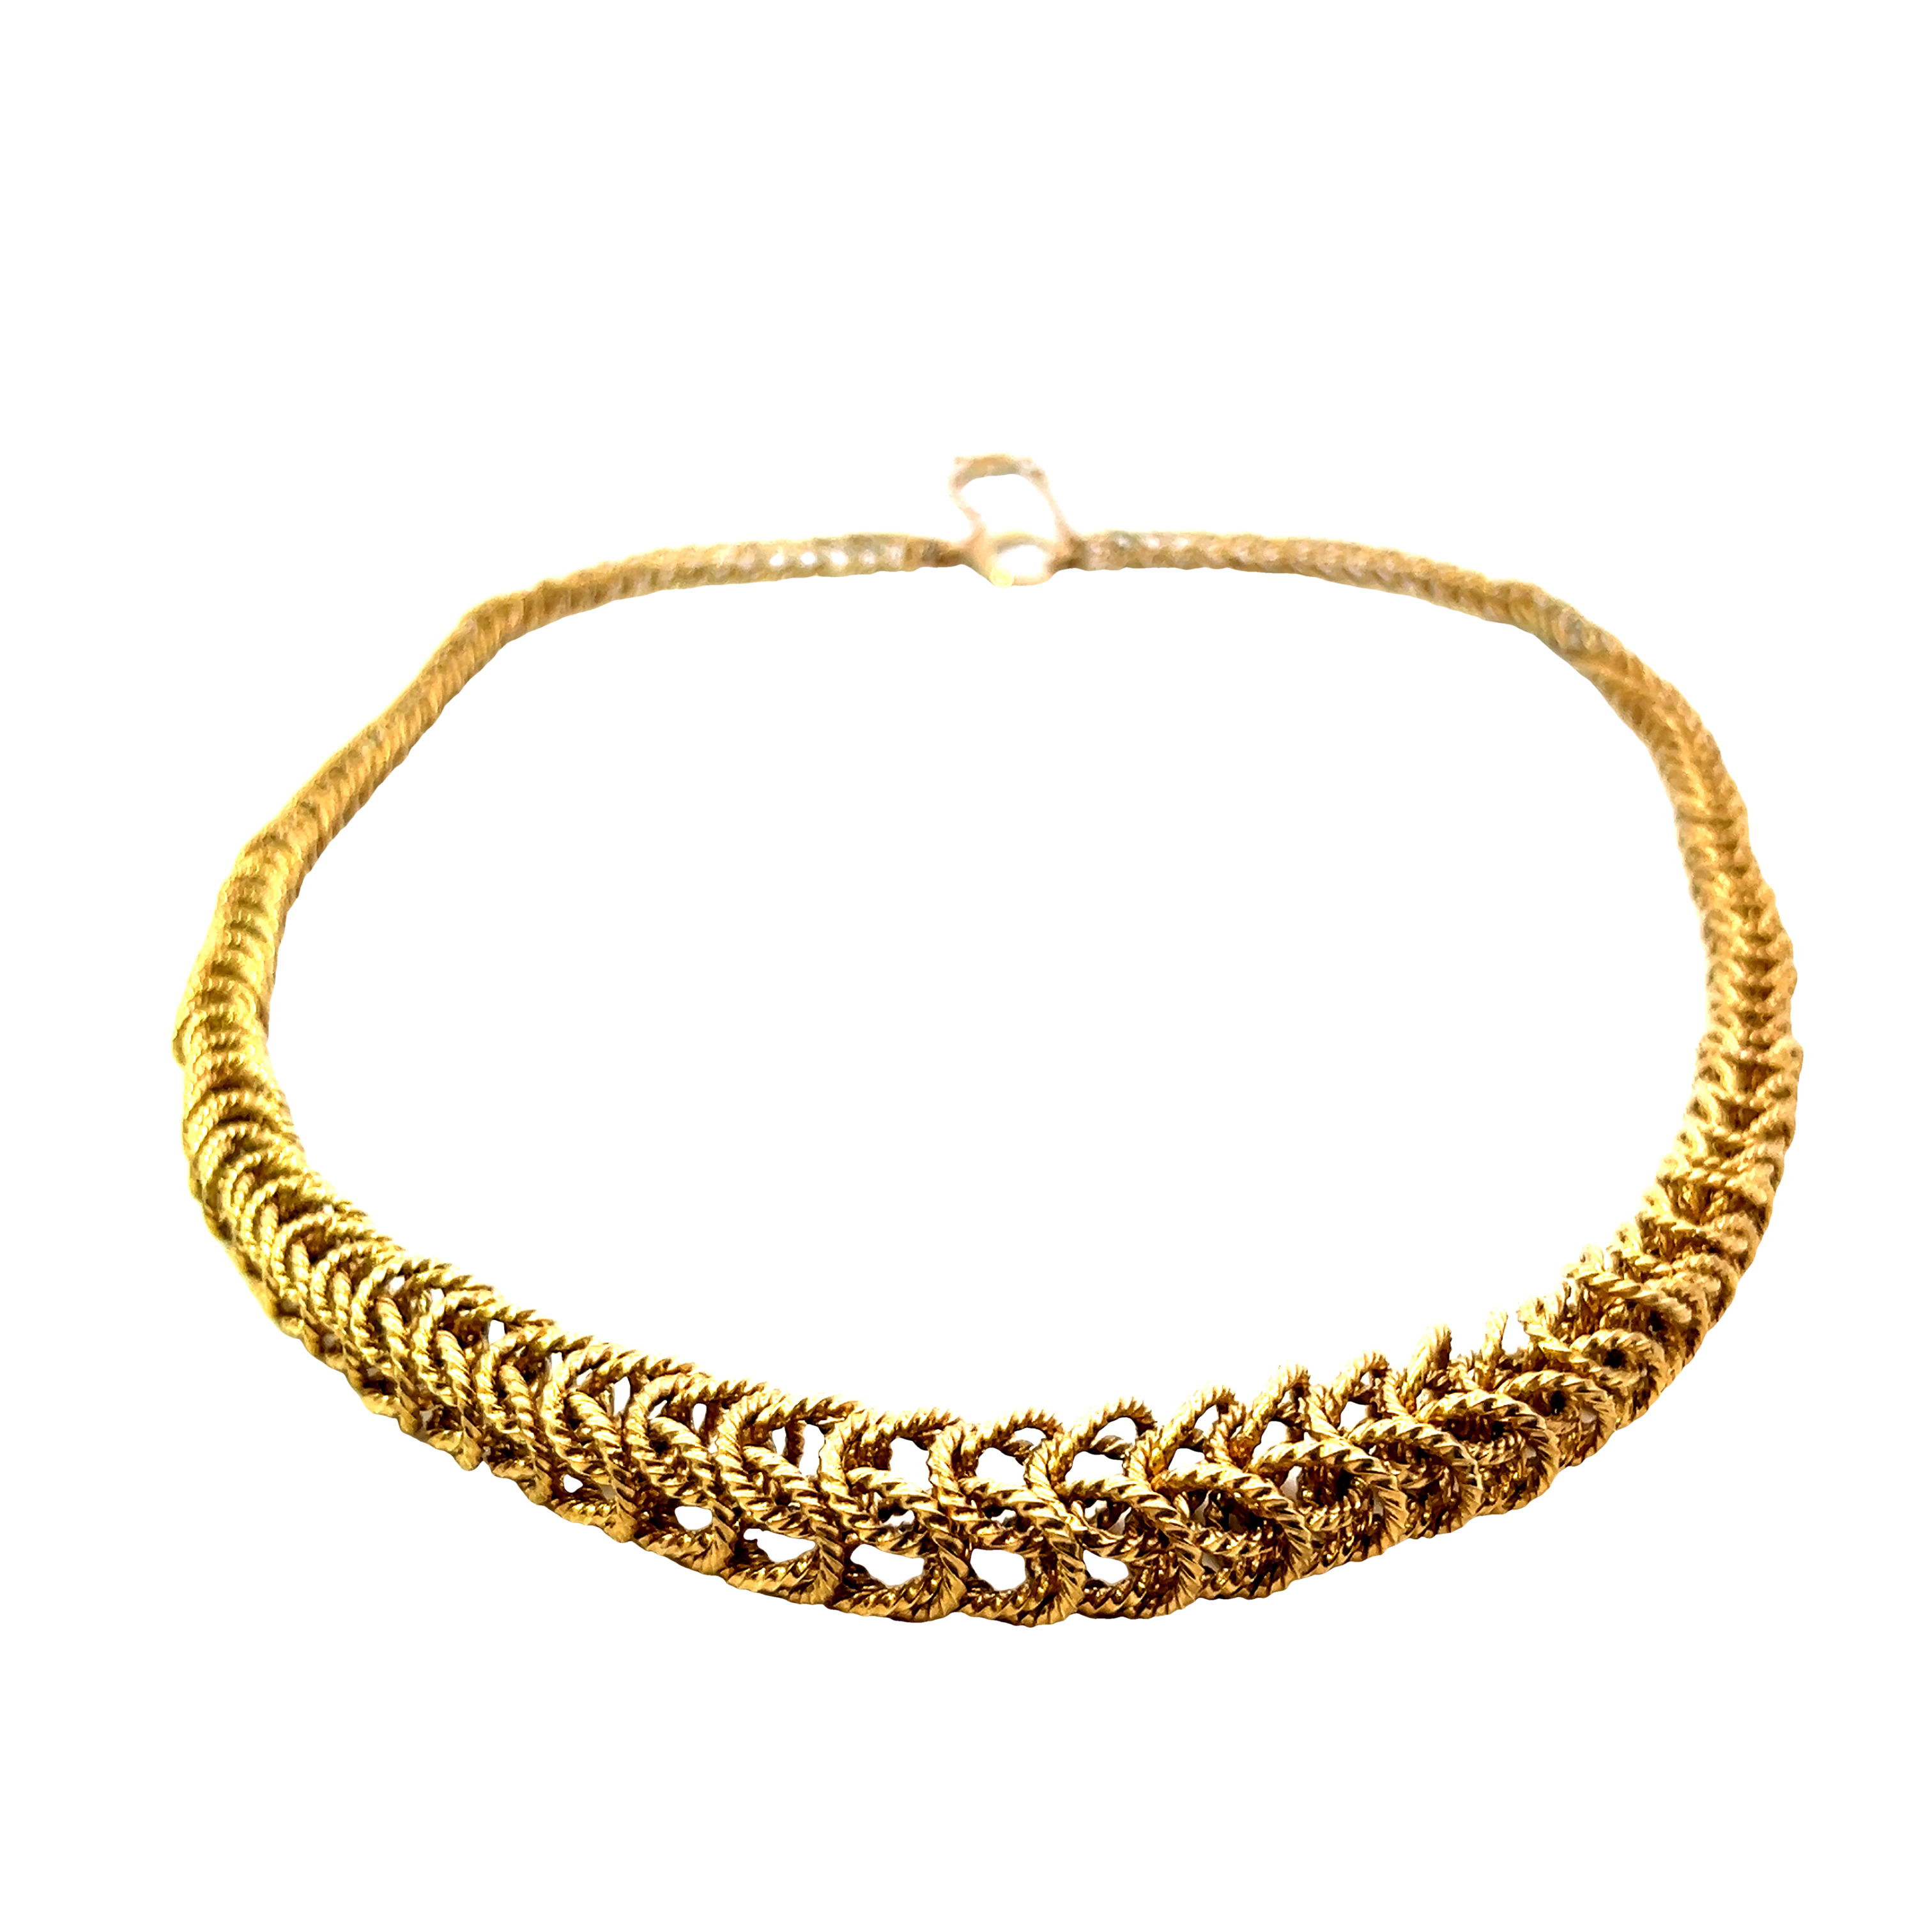 9 carat yellow gold necklace